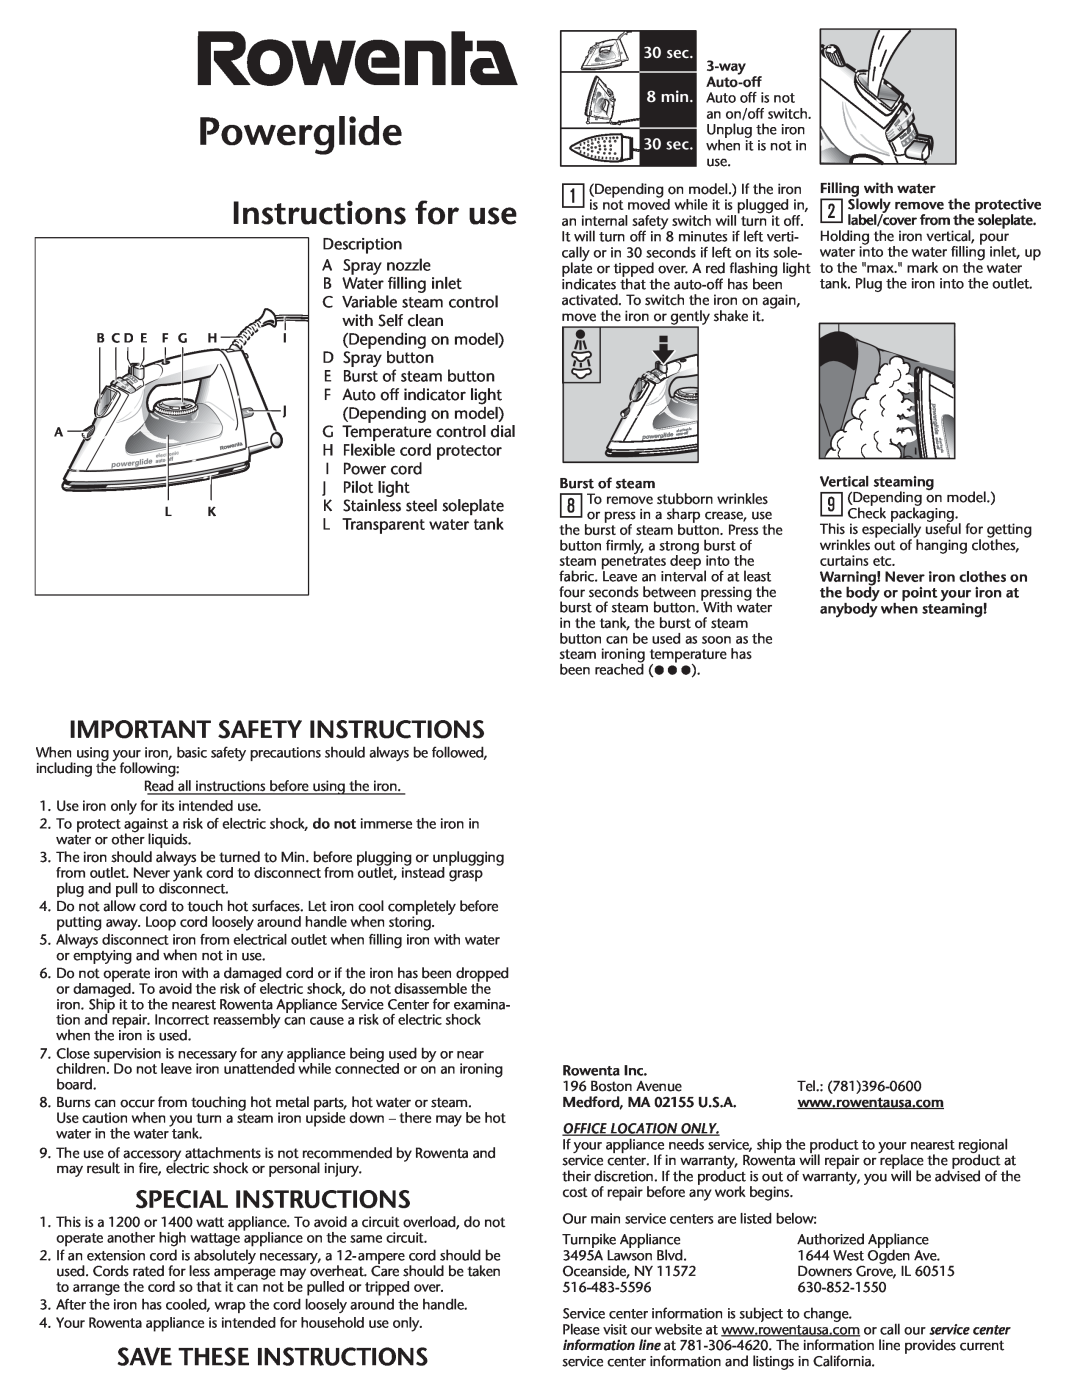 Rowenta Powerglide Steam Iron important safety instructions Instructions for use, Important Safety Instructions, 8 min 